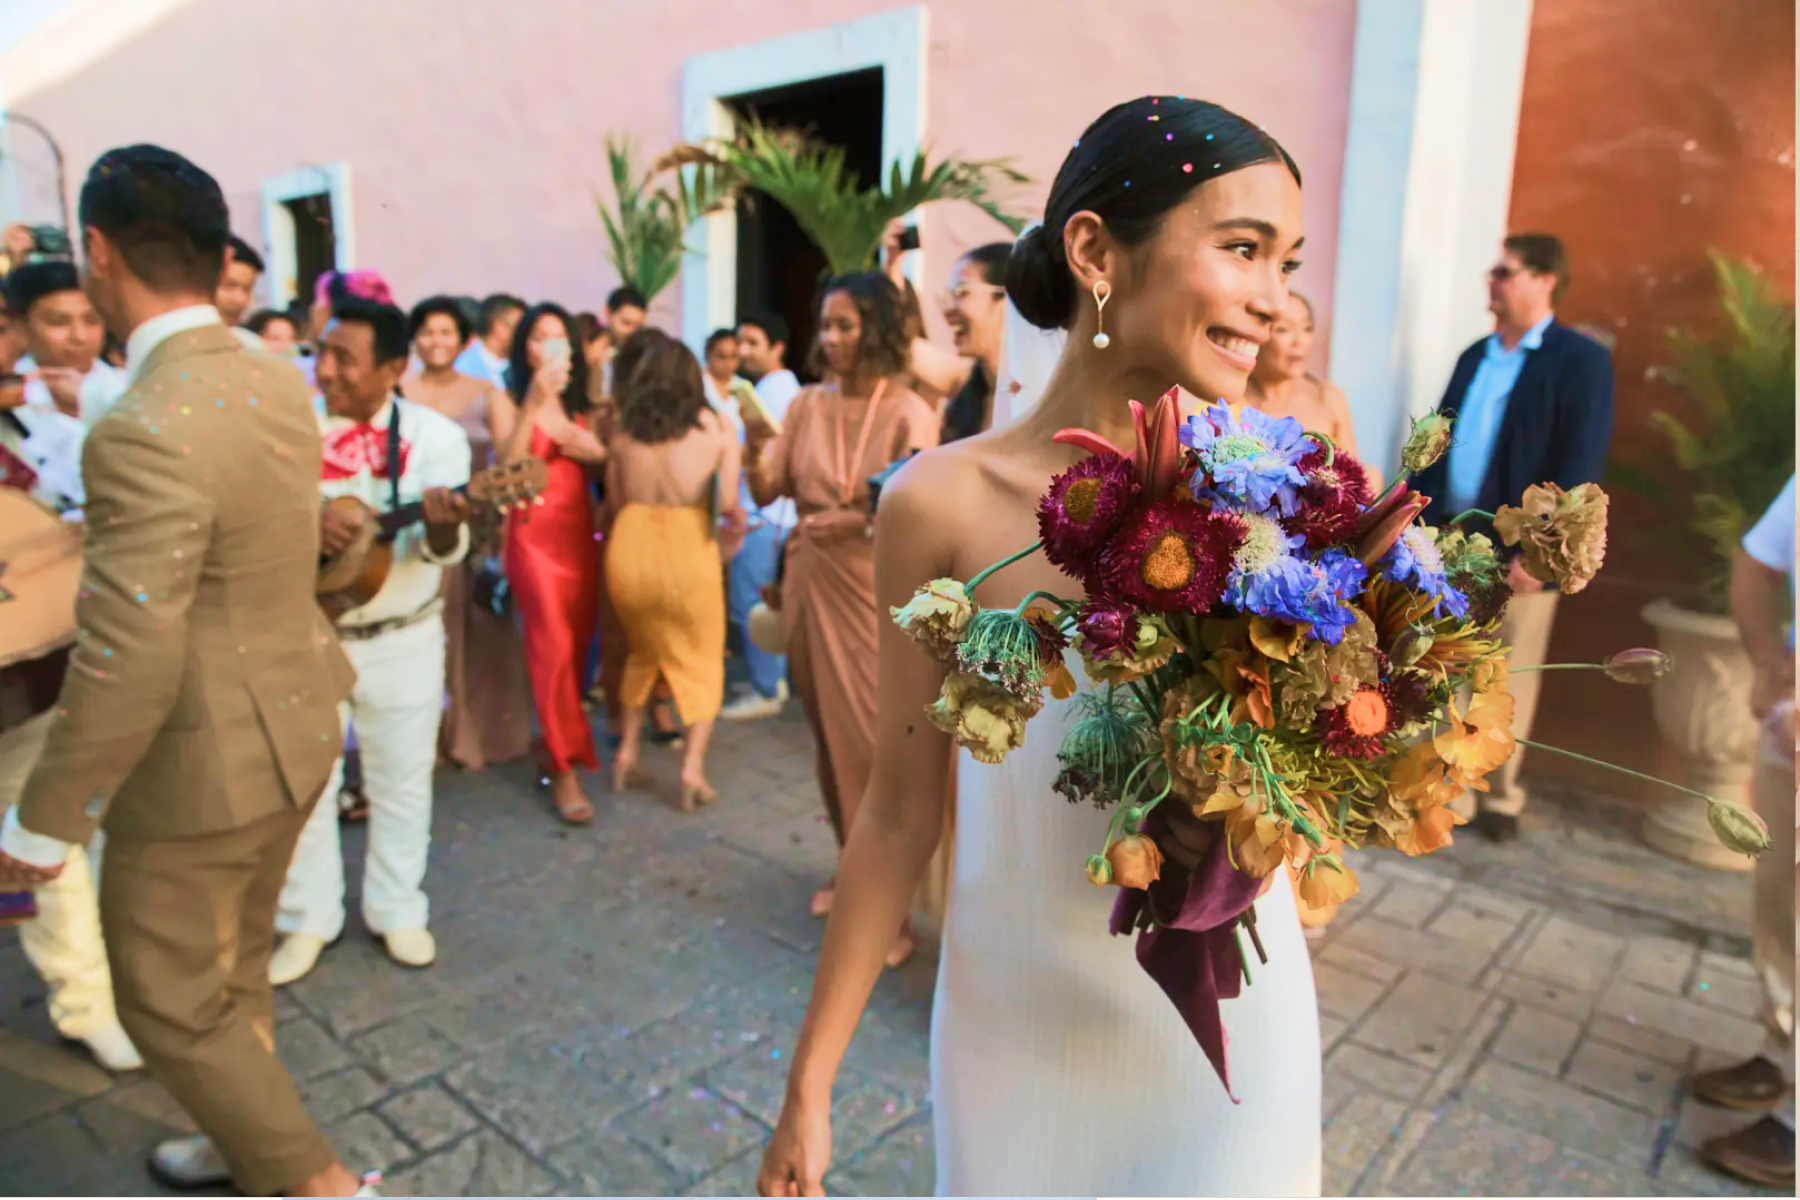 Photograph of a bride surrounded by loved ones at her wedding. She is holding a bouquet and smiling towards something off-camera.